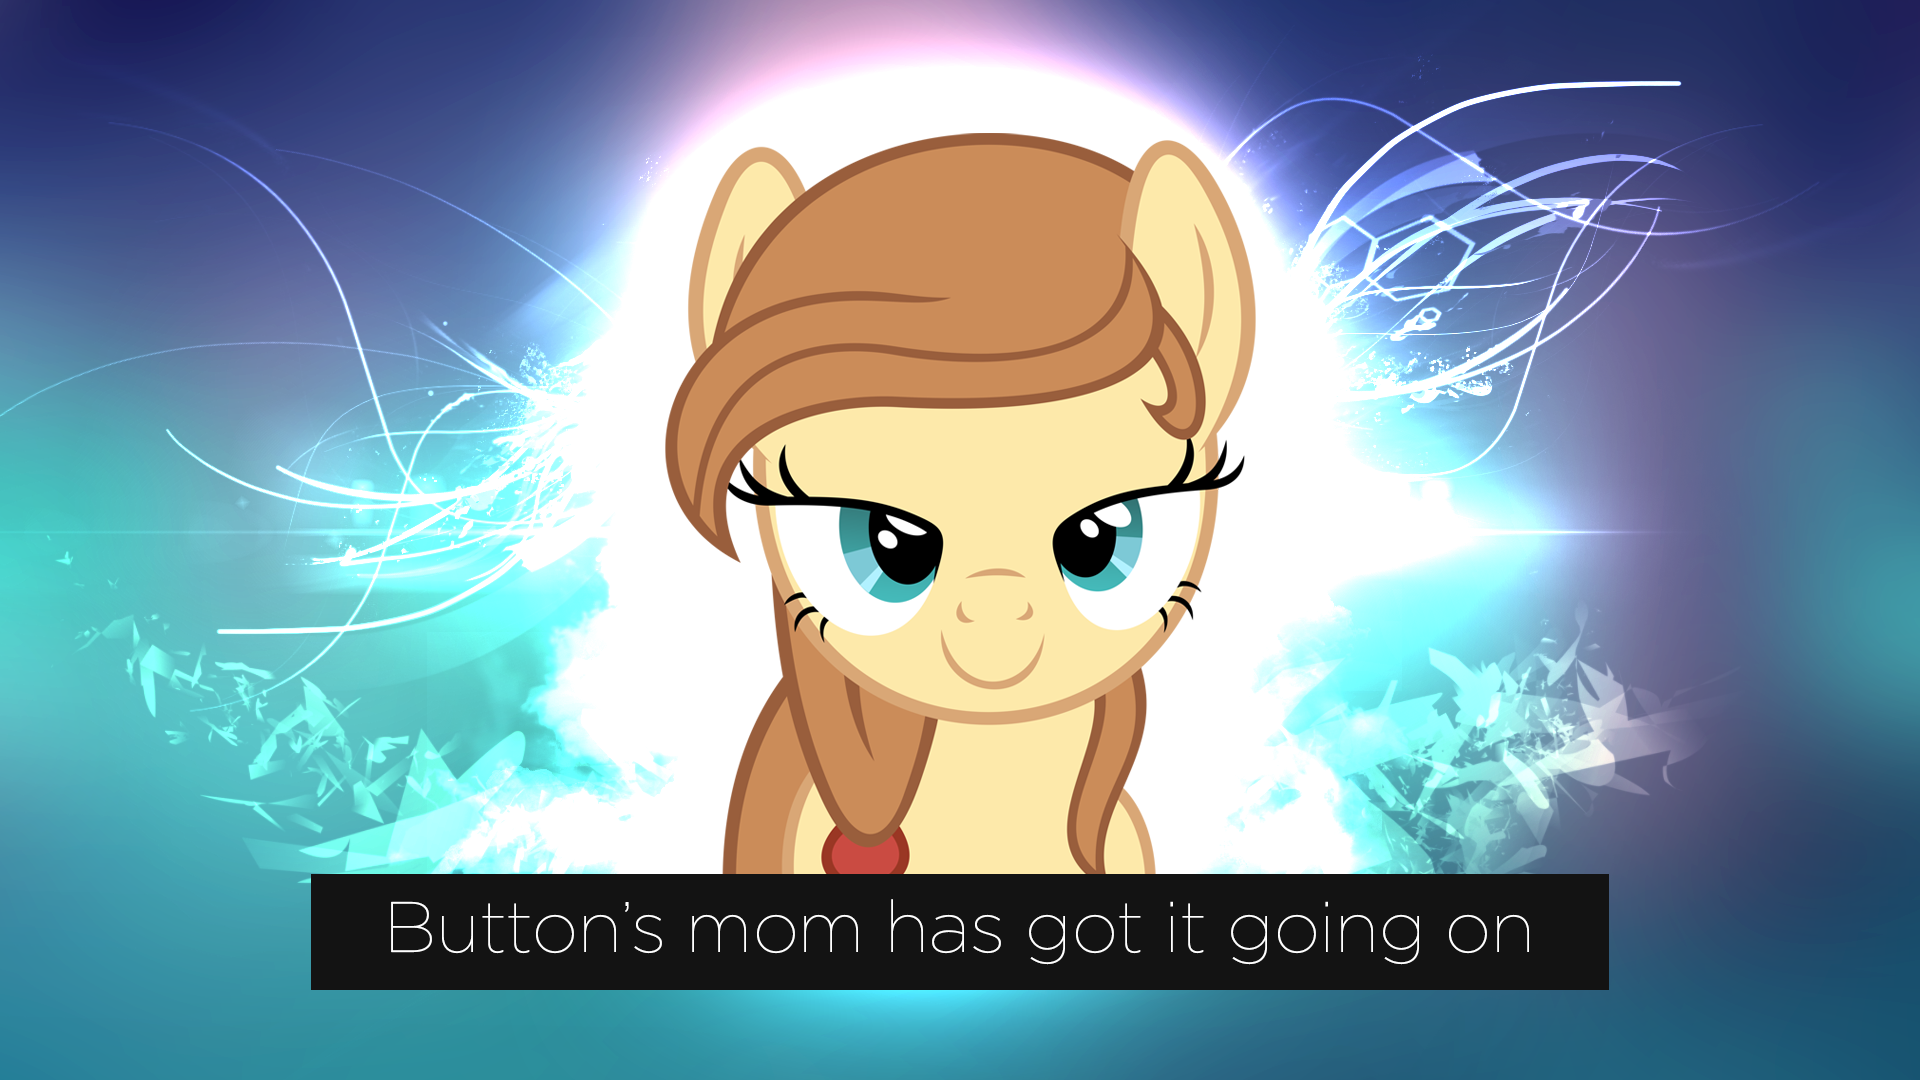 Button's Mom Has Got It Going On by Clockwork65, dadio46 and Tzolkine